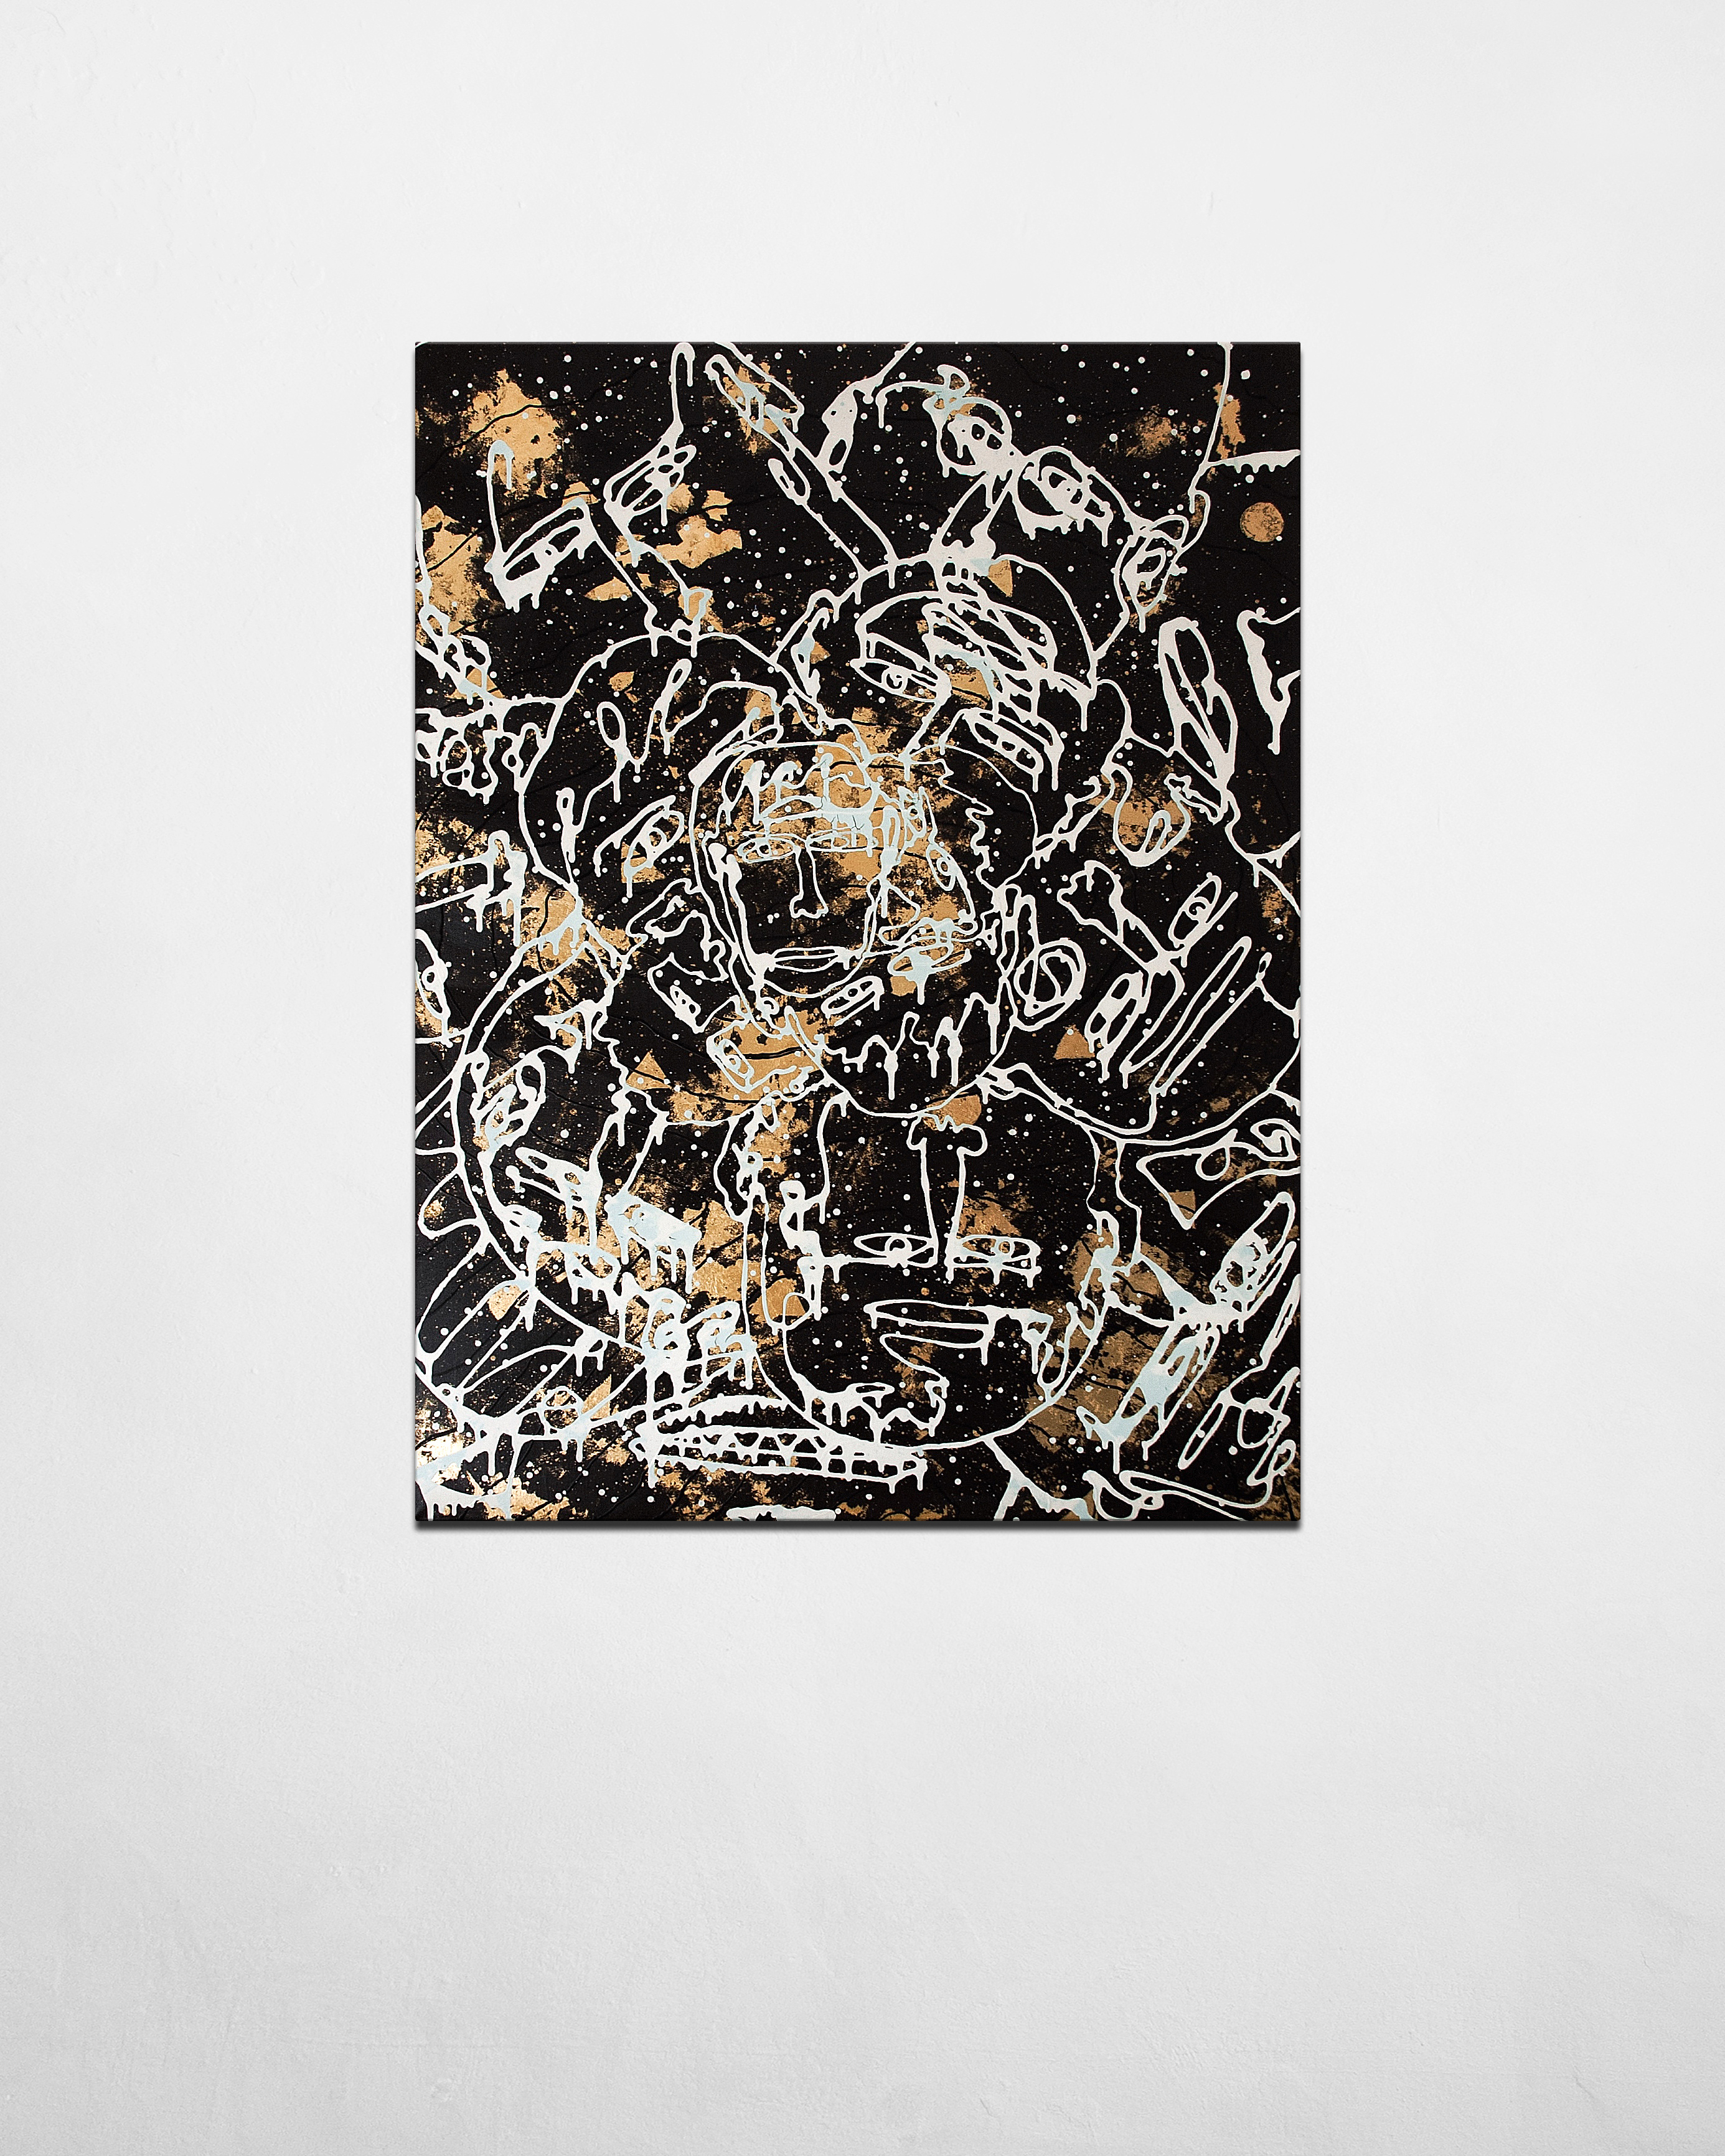 Gold that is deep inside me - contemporary artwork - gold and black